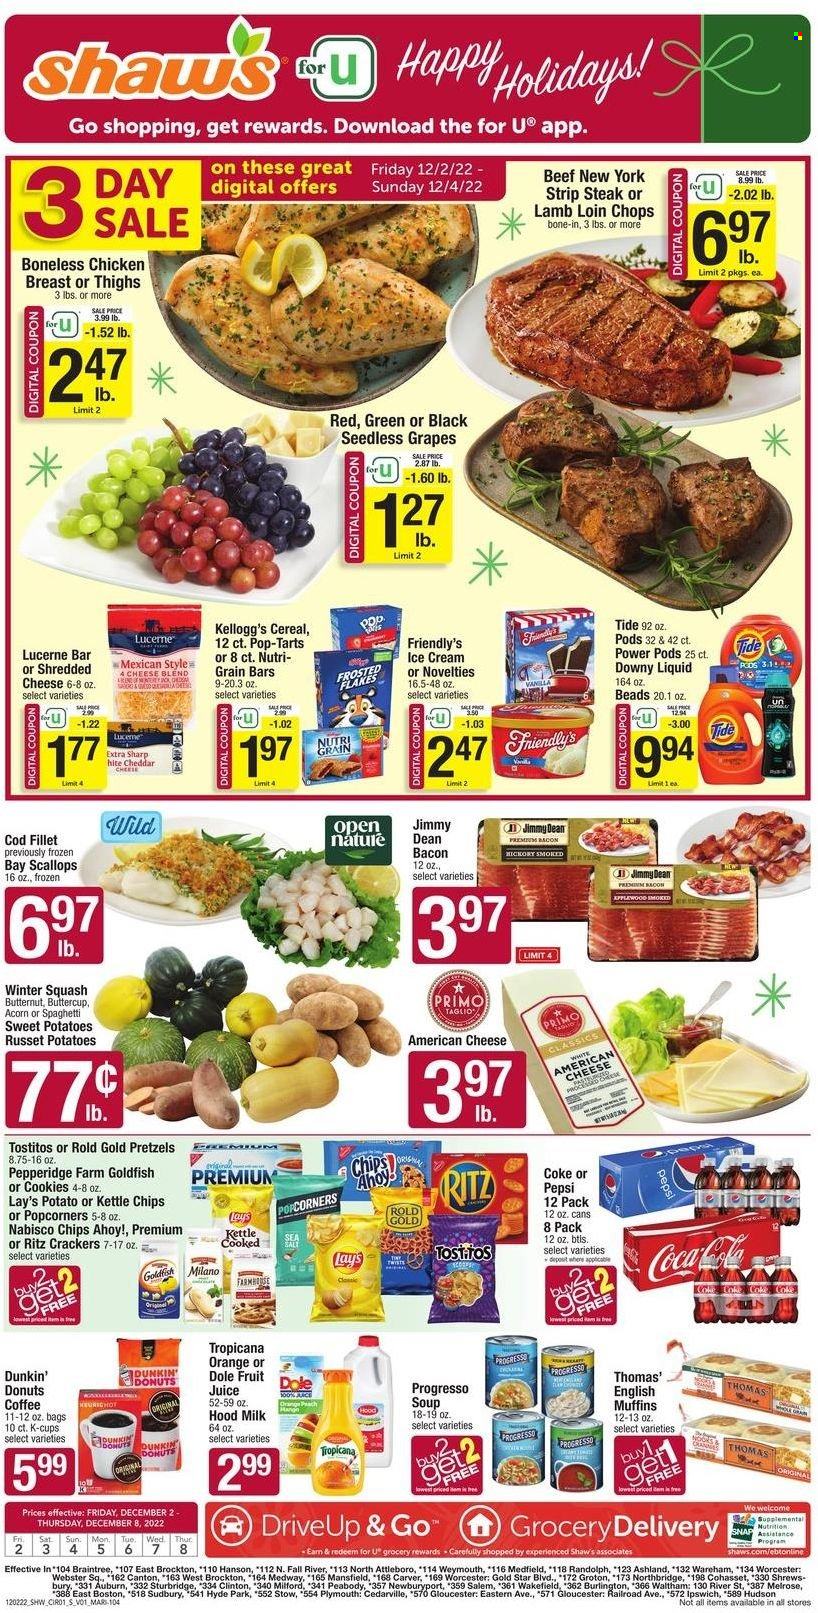 thumbnail - Shaw’s Flyer - 12/02/2022 - 12/08/2022 - Sales products - english muffins, pretzels, Dunkin' Donuts, butternut squash, russet potatoes, sweet potato, potatoes, Dole, grapes, seedless grapes, cod, fish fillets, scallops, seafood, soup, pasta, Progresso, Jimmy Dean, bacon, chicken breasts, american cheese, shredded cheese, cheese, snack bar, milk, ice cream, ice cream bars, Friendly's Ice Cream, cookies, Mars, crackers, Kellogg's, Pop-Tarts, Chips Ahoy!, RITZ, Nabisco, Lay’s, Goldfish, Tostitos, Kettle chips, salty snack, cereals, Frosted Flakes, Nutri-Grain, Coca-Cola, Pepsi, juice, fruit juice, soft drink, Coke, carbonated soft drink, coffee capsules, K-Cups, Keurig, chicken thighs, beef meat, beef steak, steak, striploin steak, lamb loin, lamb meat, Tide, Downy Laundry. Page 1.